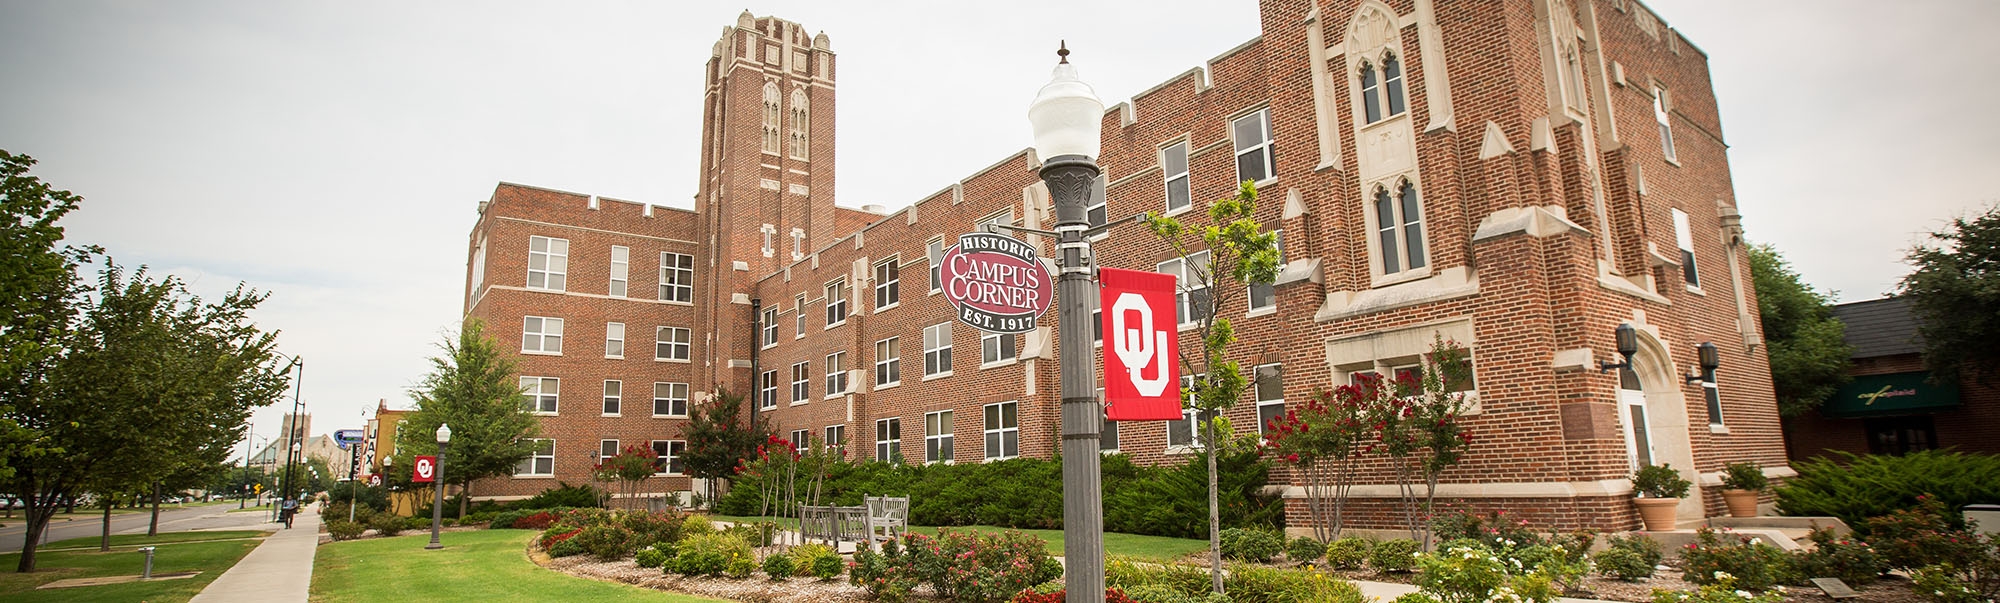 Whitehand Hall with lamp posts with an OU flag beside it